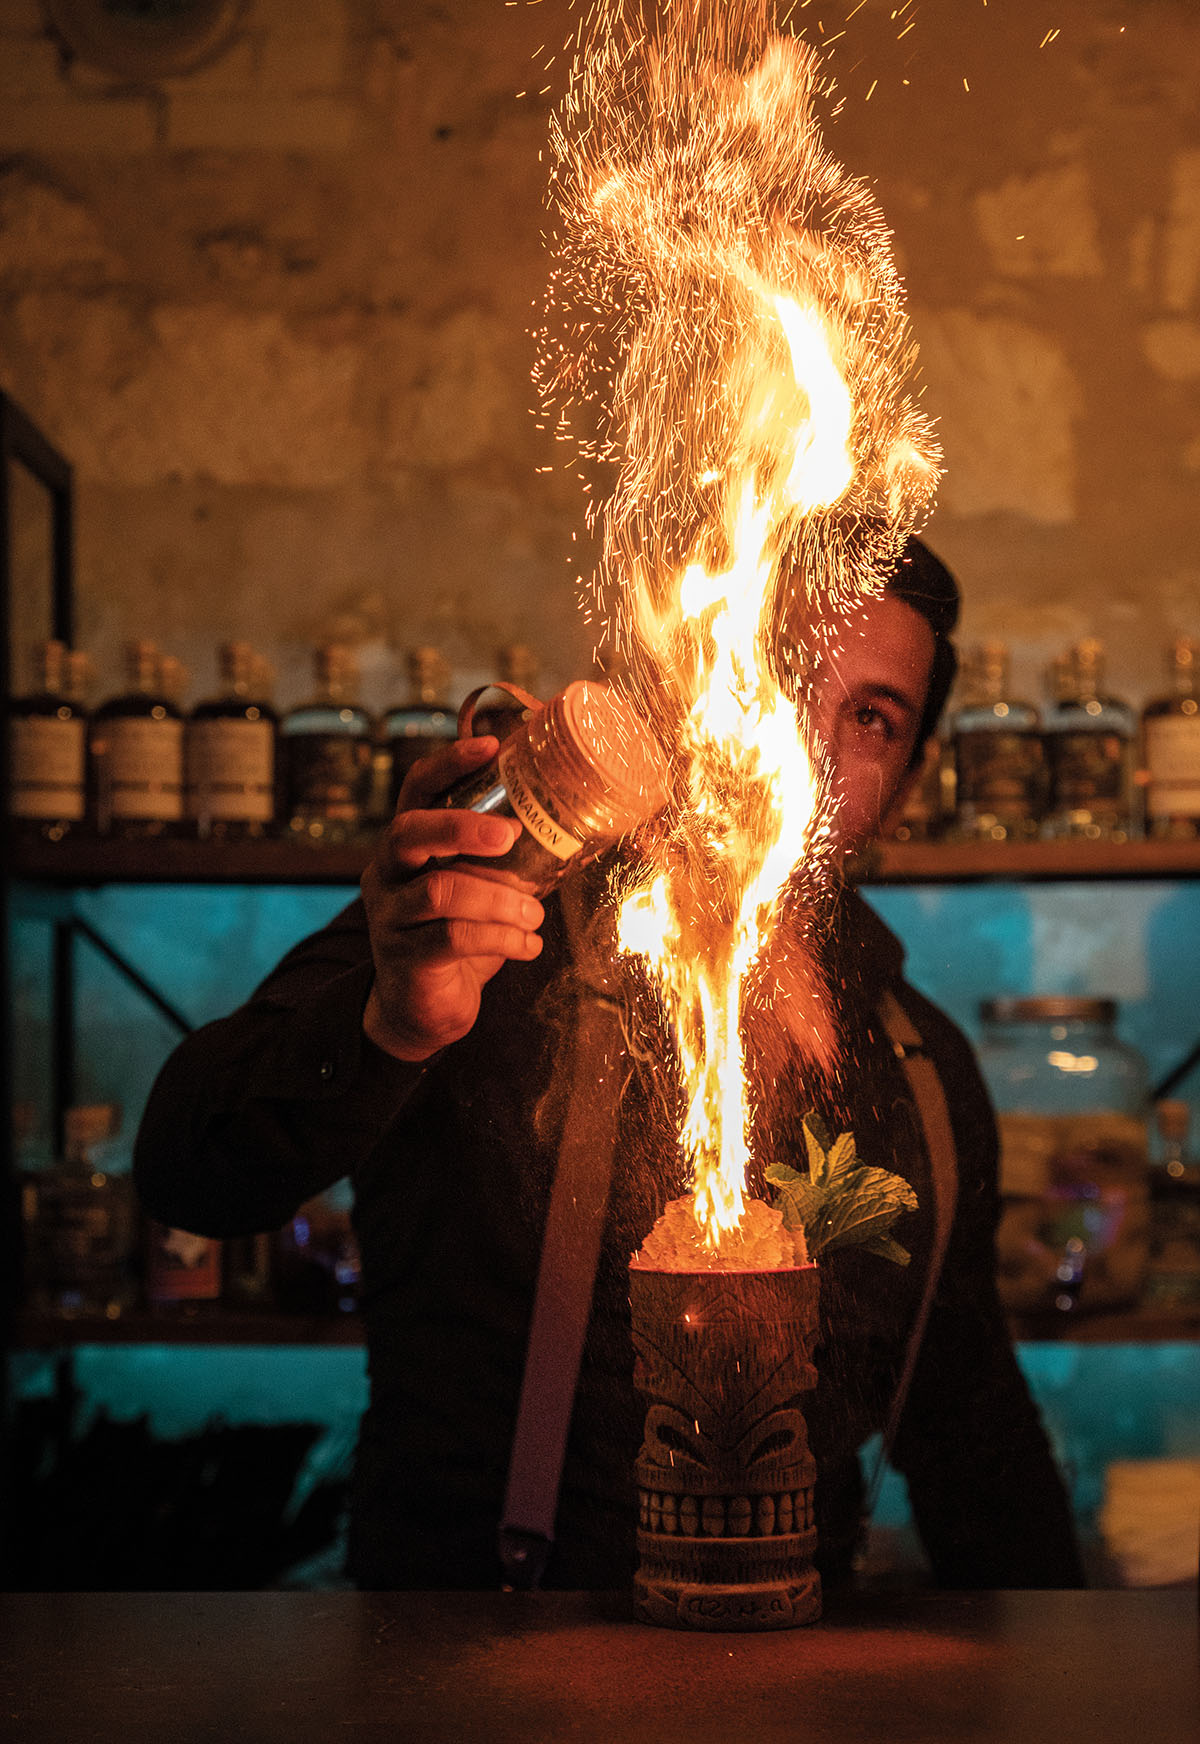 A bartender stands back as a large column of fire and sparks shoots up from a cocktail